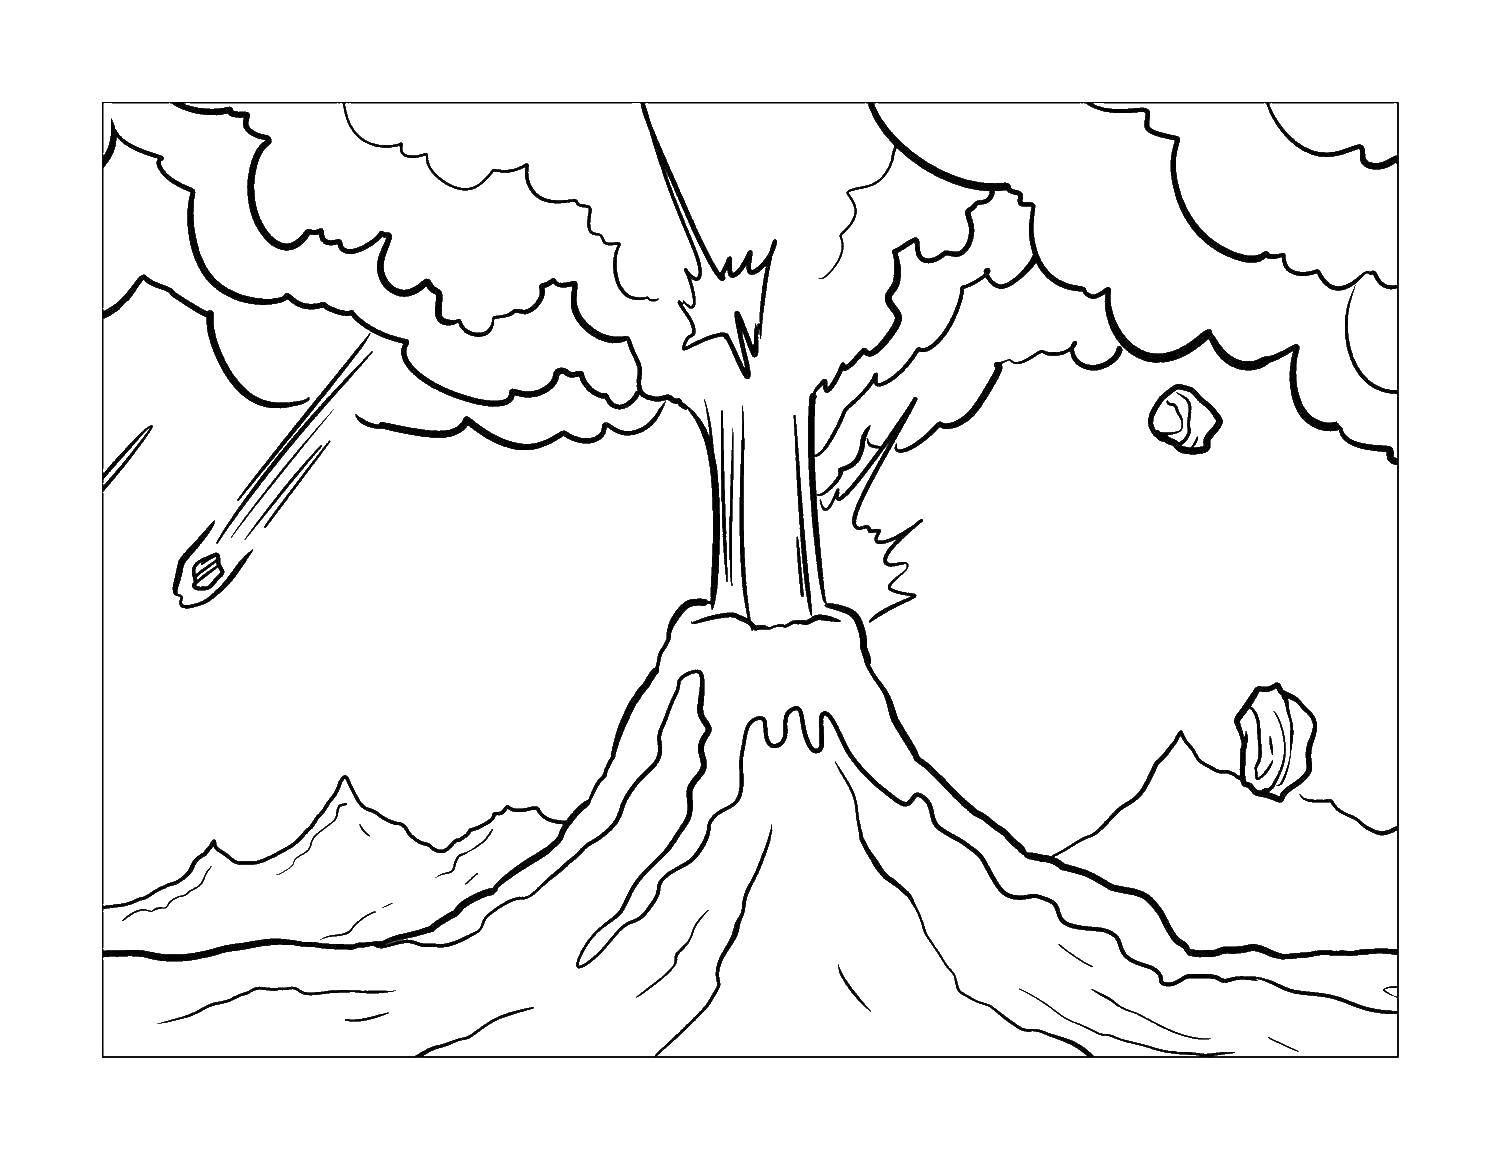 Online coloring pages coloring page epting volcano volcano coloring pages for kids